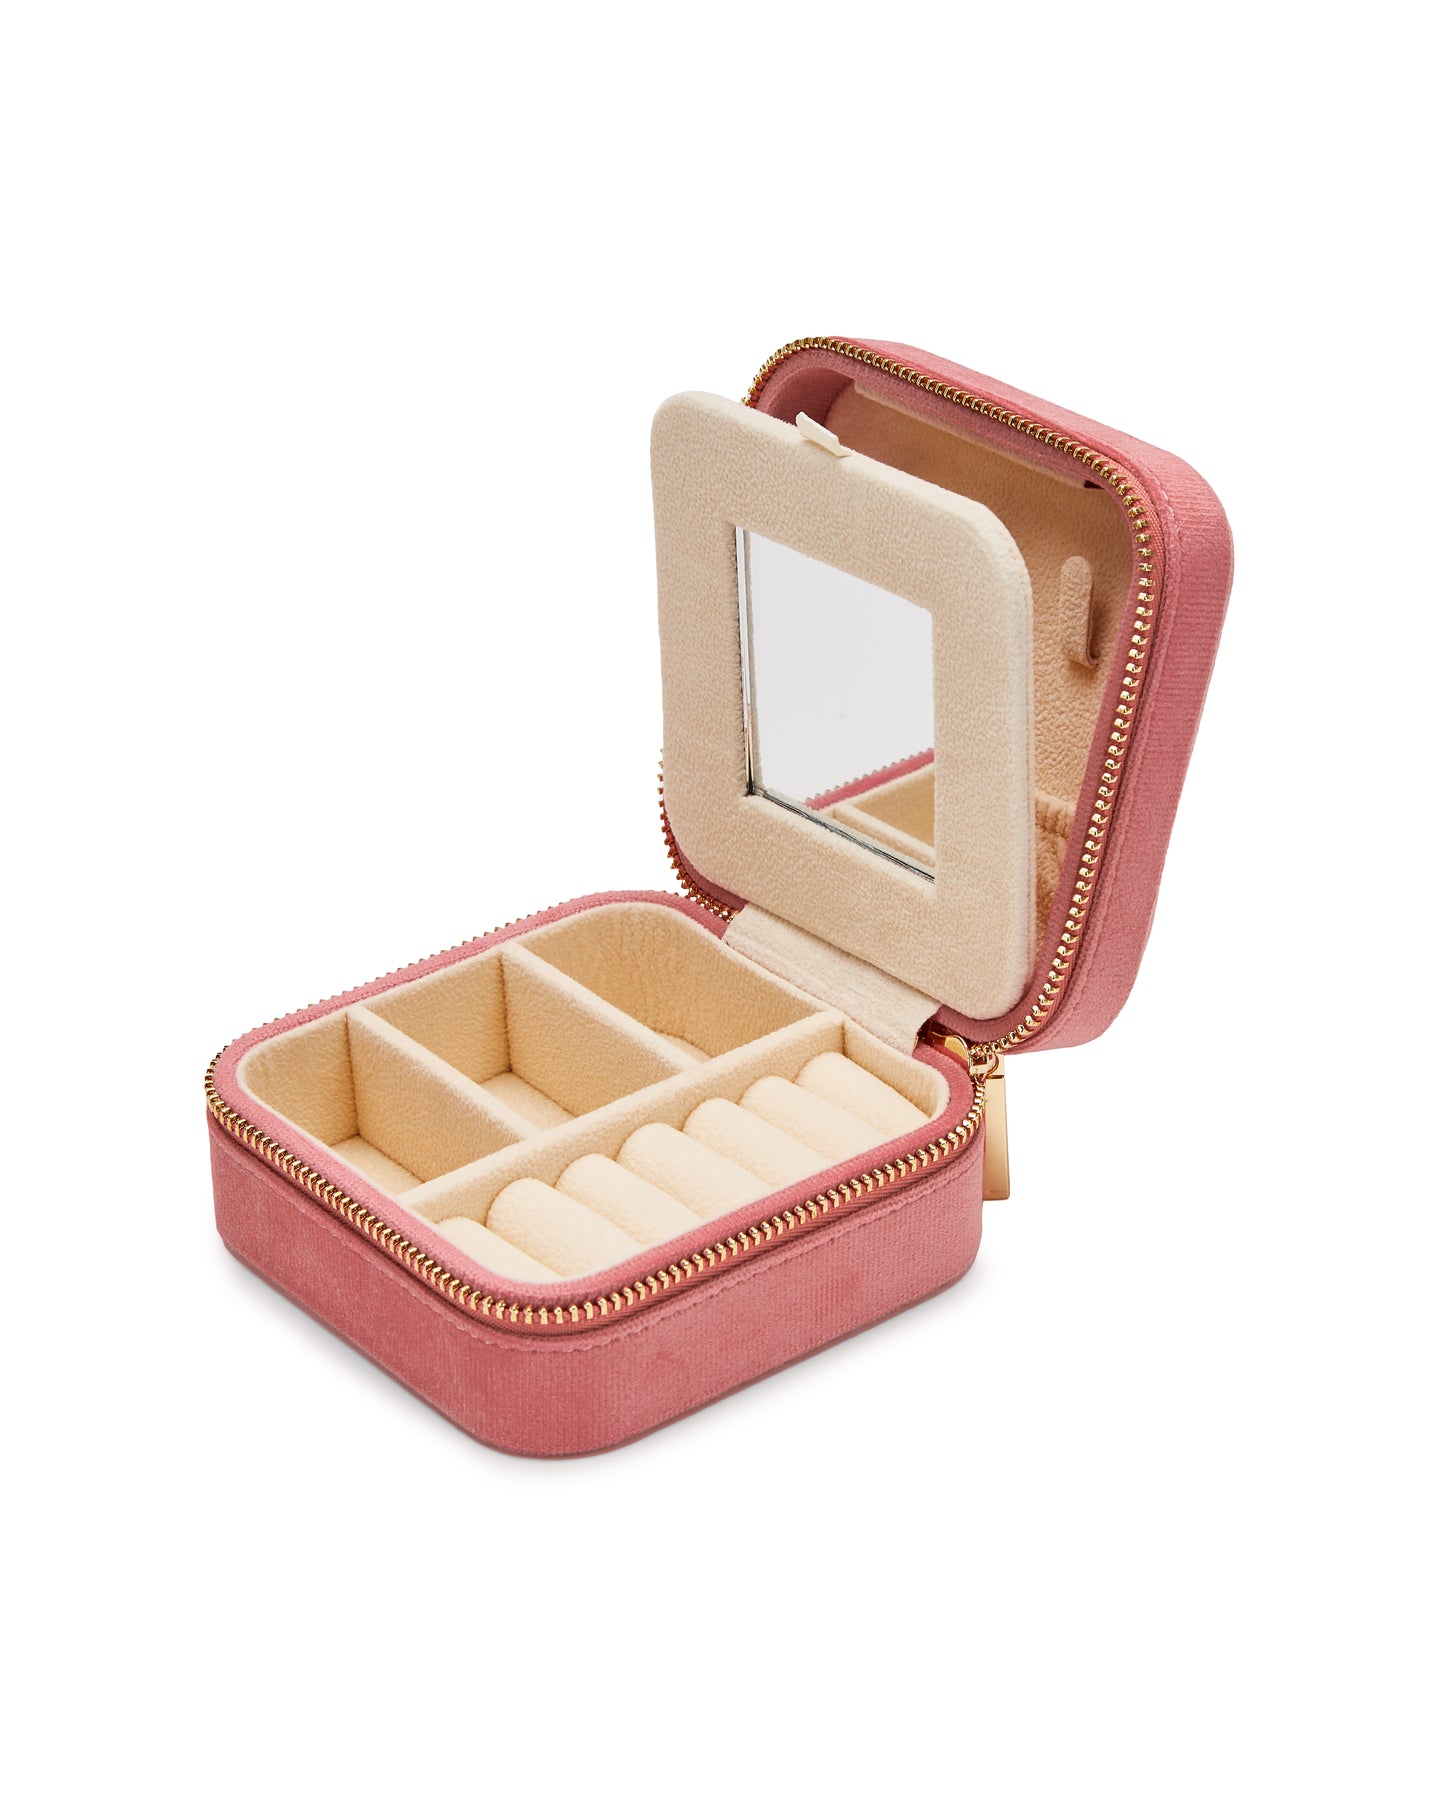 VELVET JEWELRY BOX col. pink, directly orderable - 5 pieces